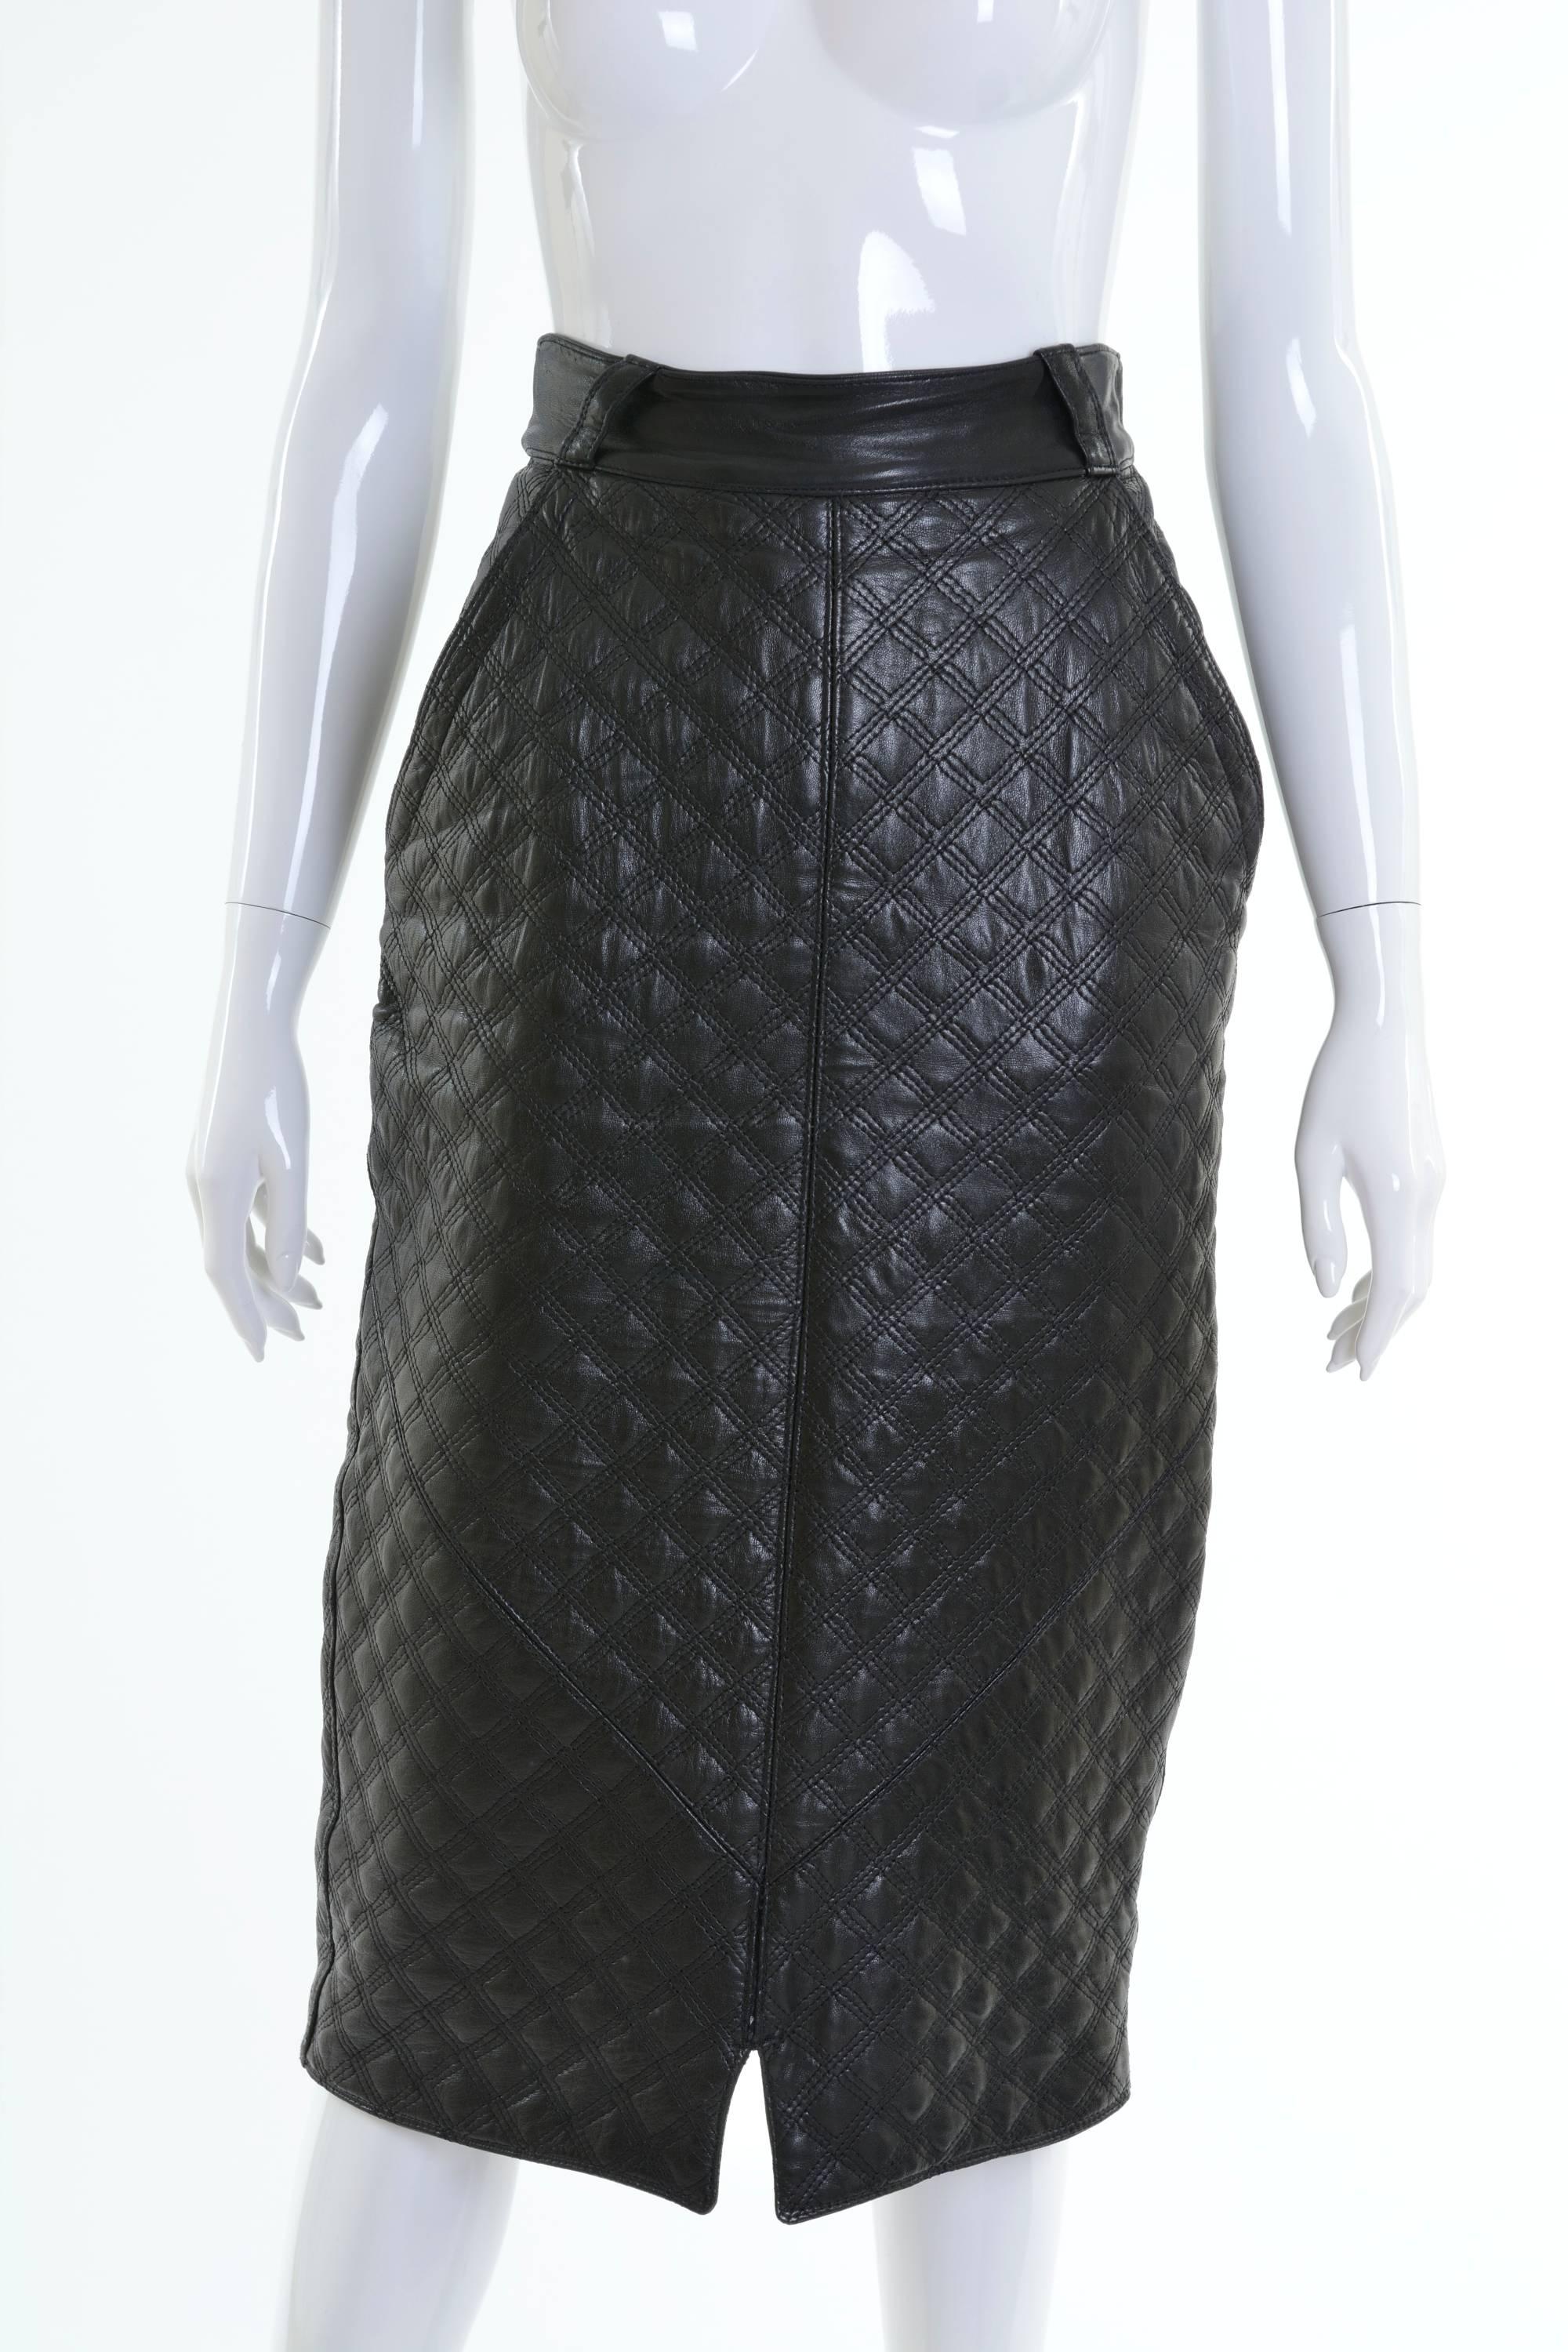 1980s GIANNI VERSACE Black Leather Suit Dress In Good Condition For Sale In Milan, Italy